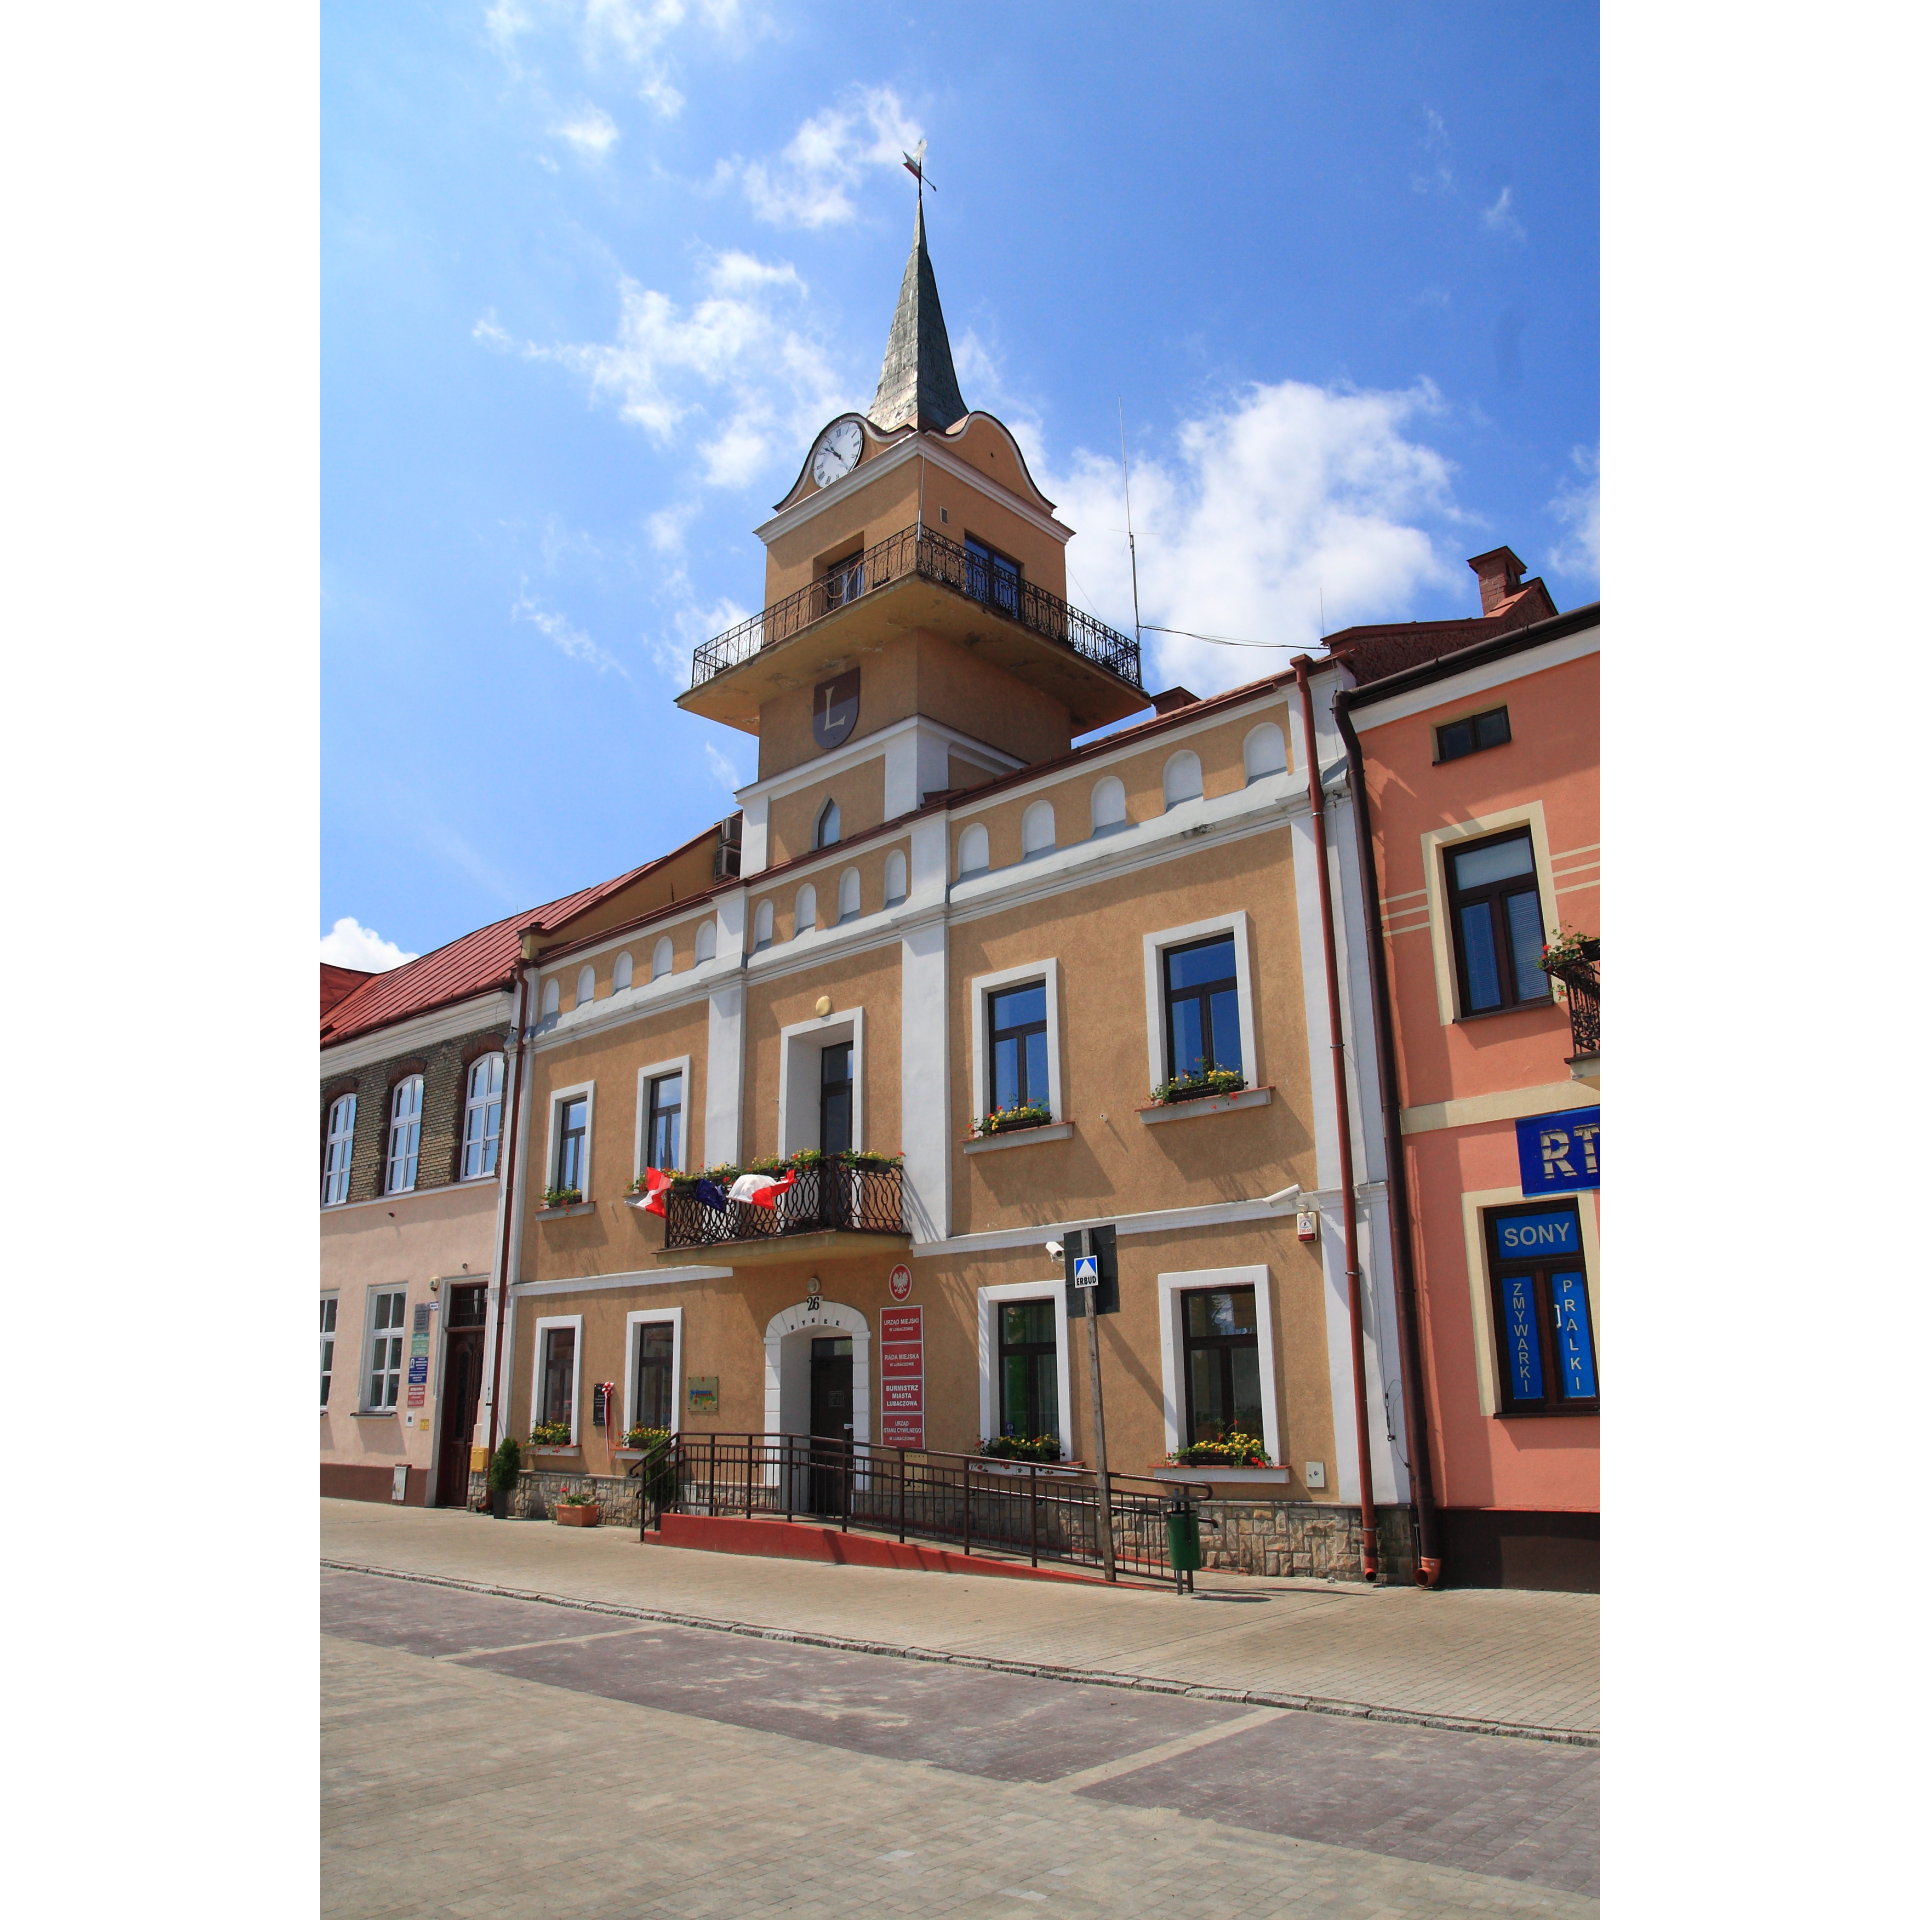 Town square in Lubaczów